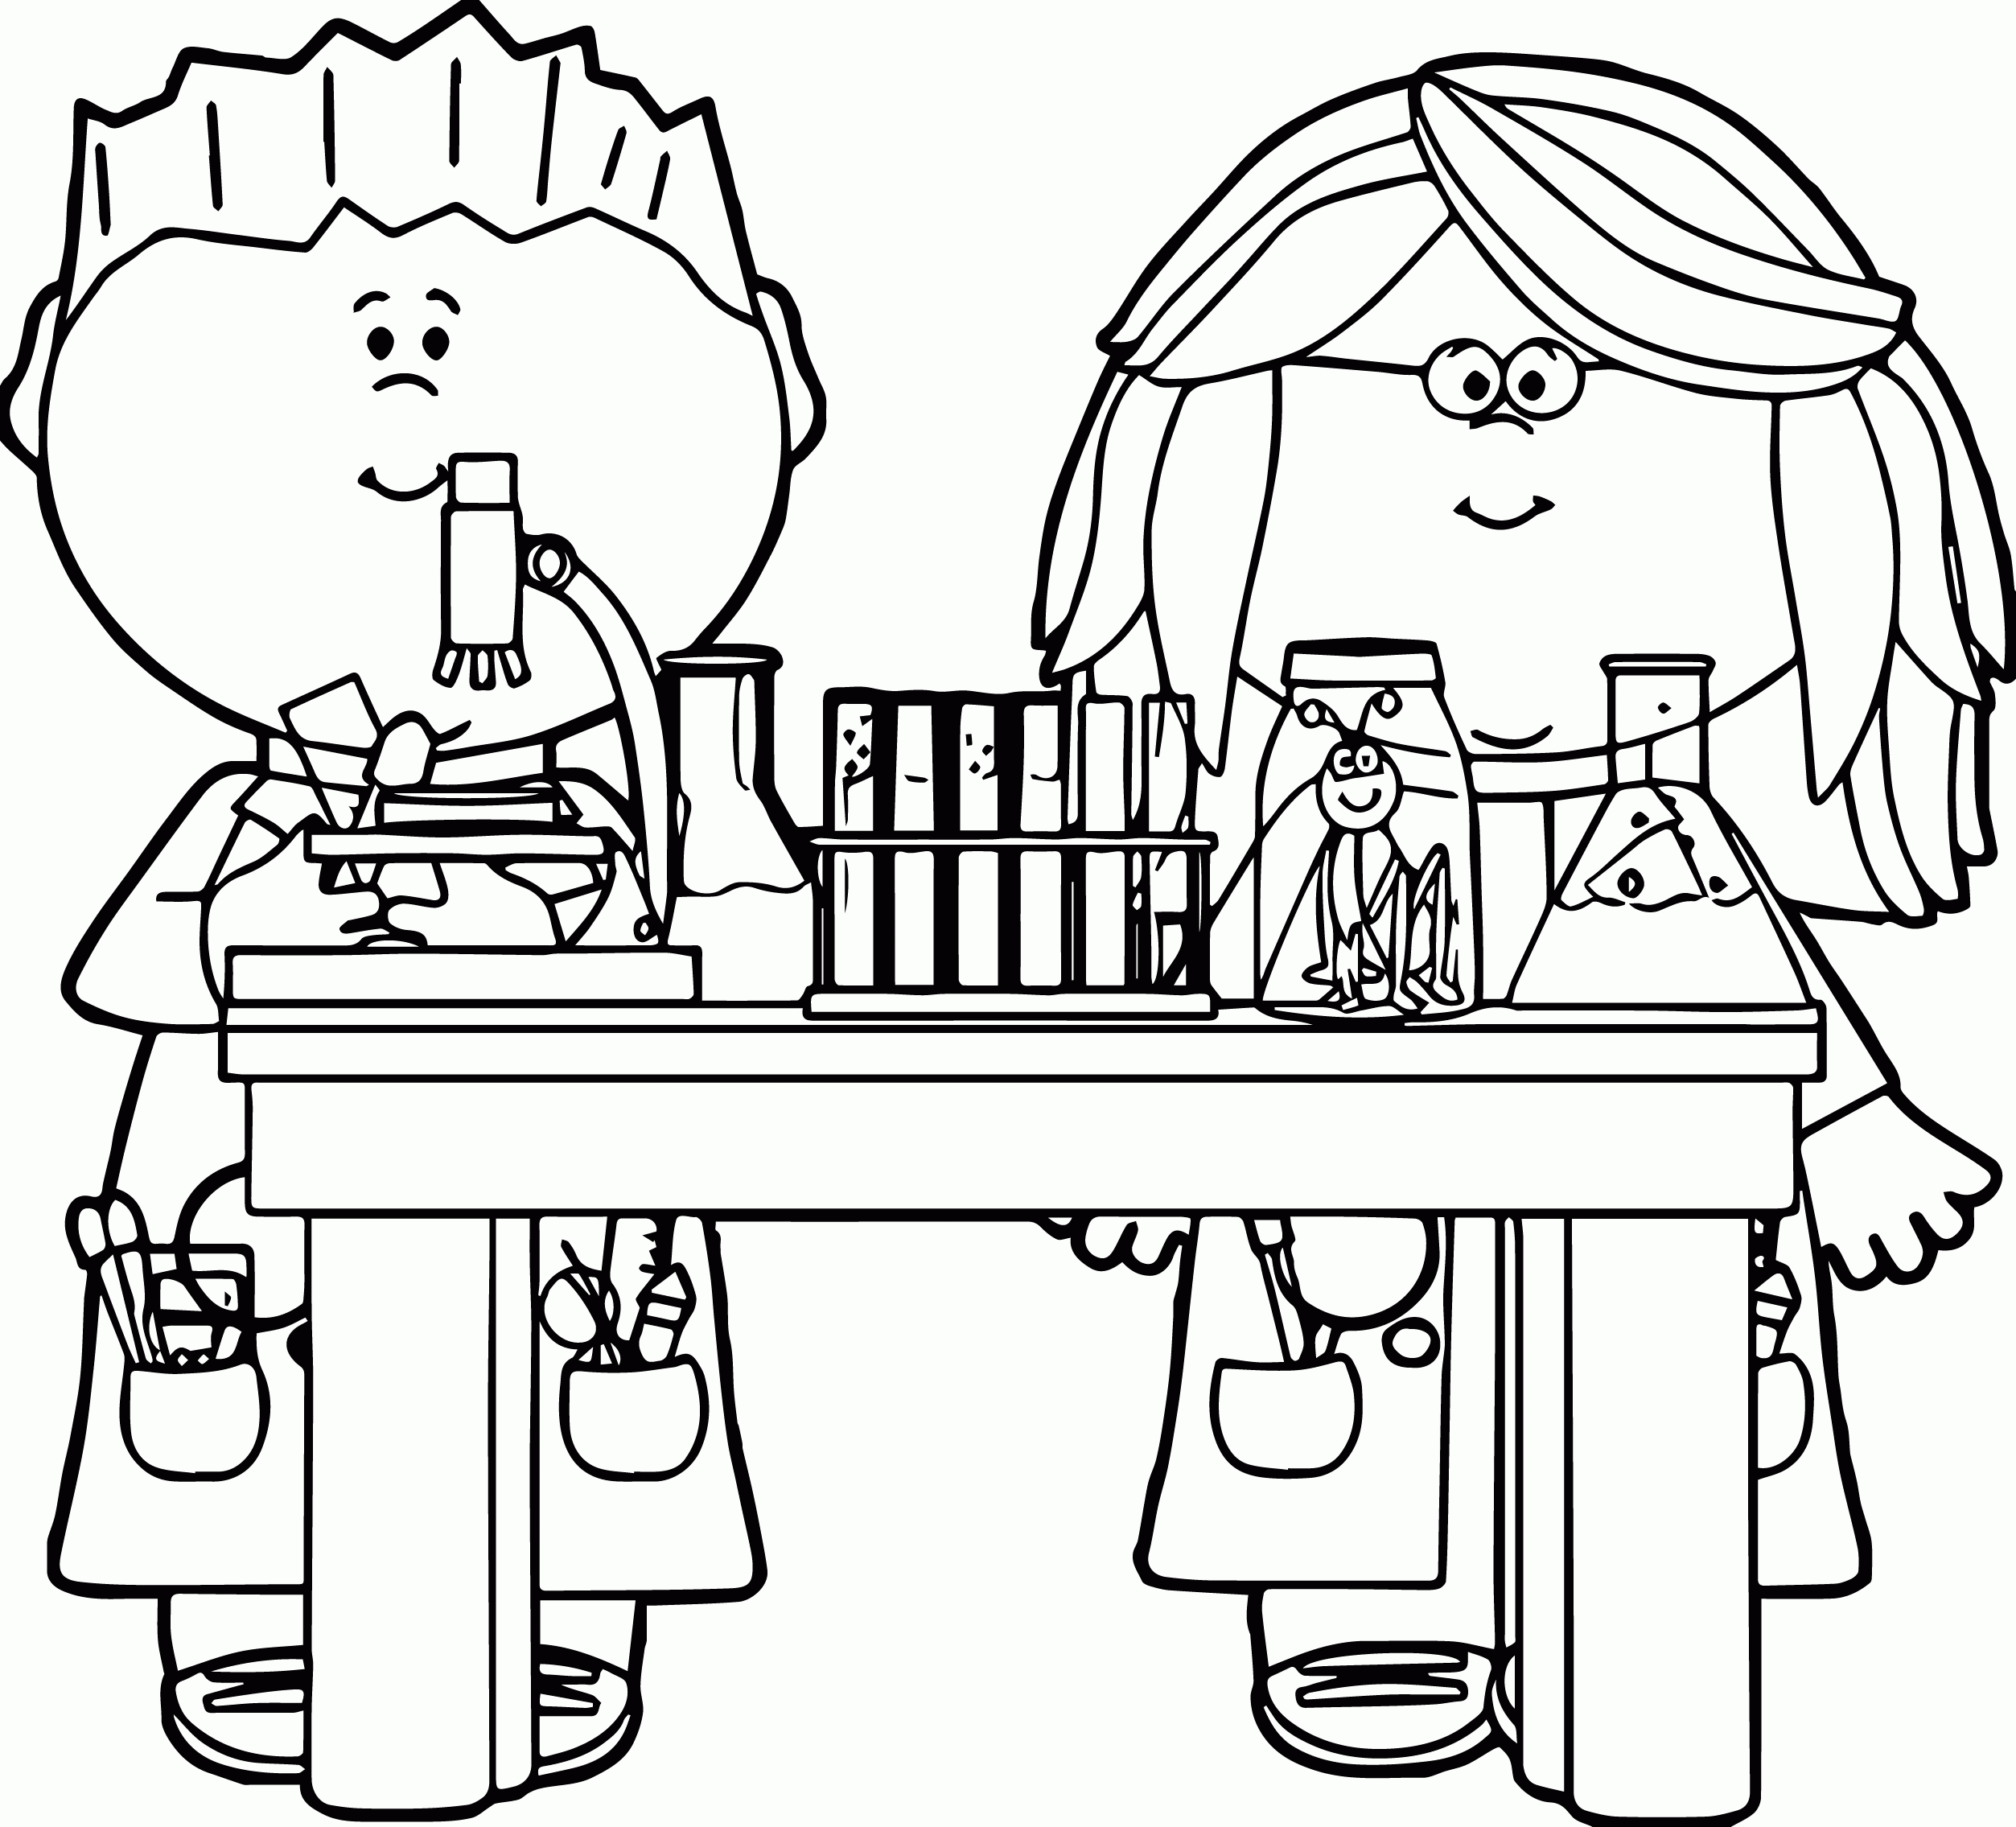 science coloring page science coloring pages science coloring page 